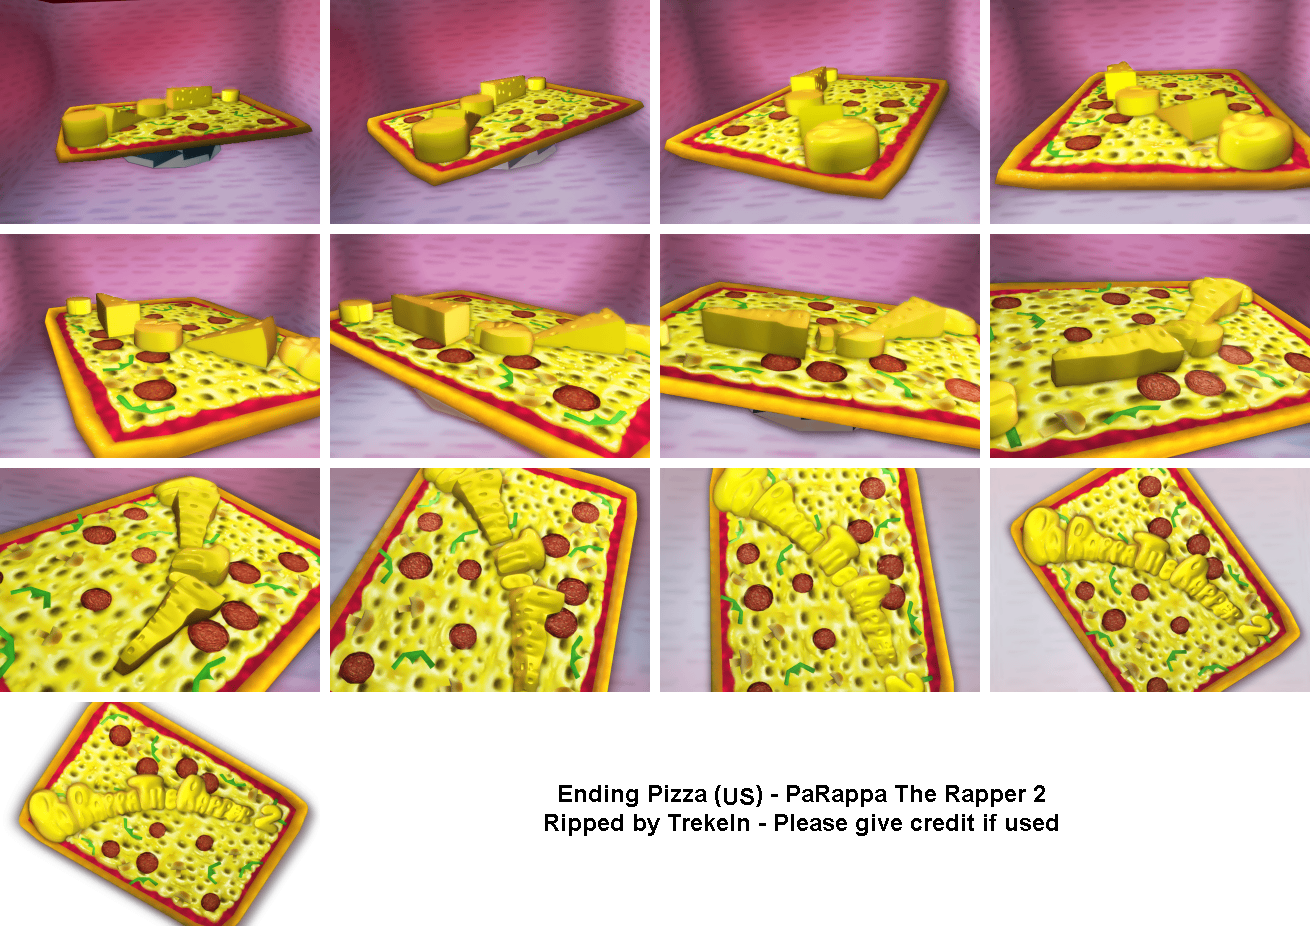 PaRappa the Rapper 2 - Ending Pizza (US)